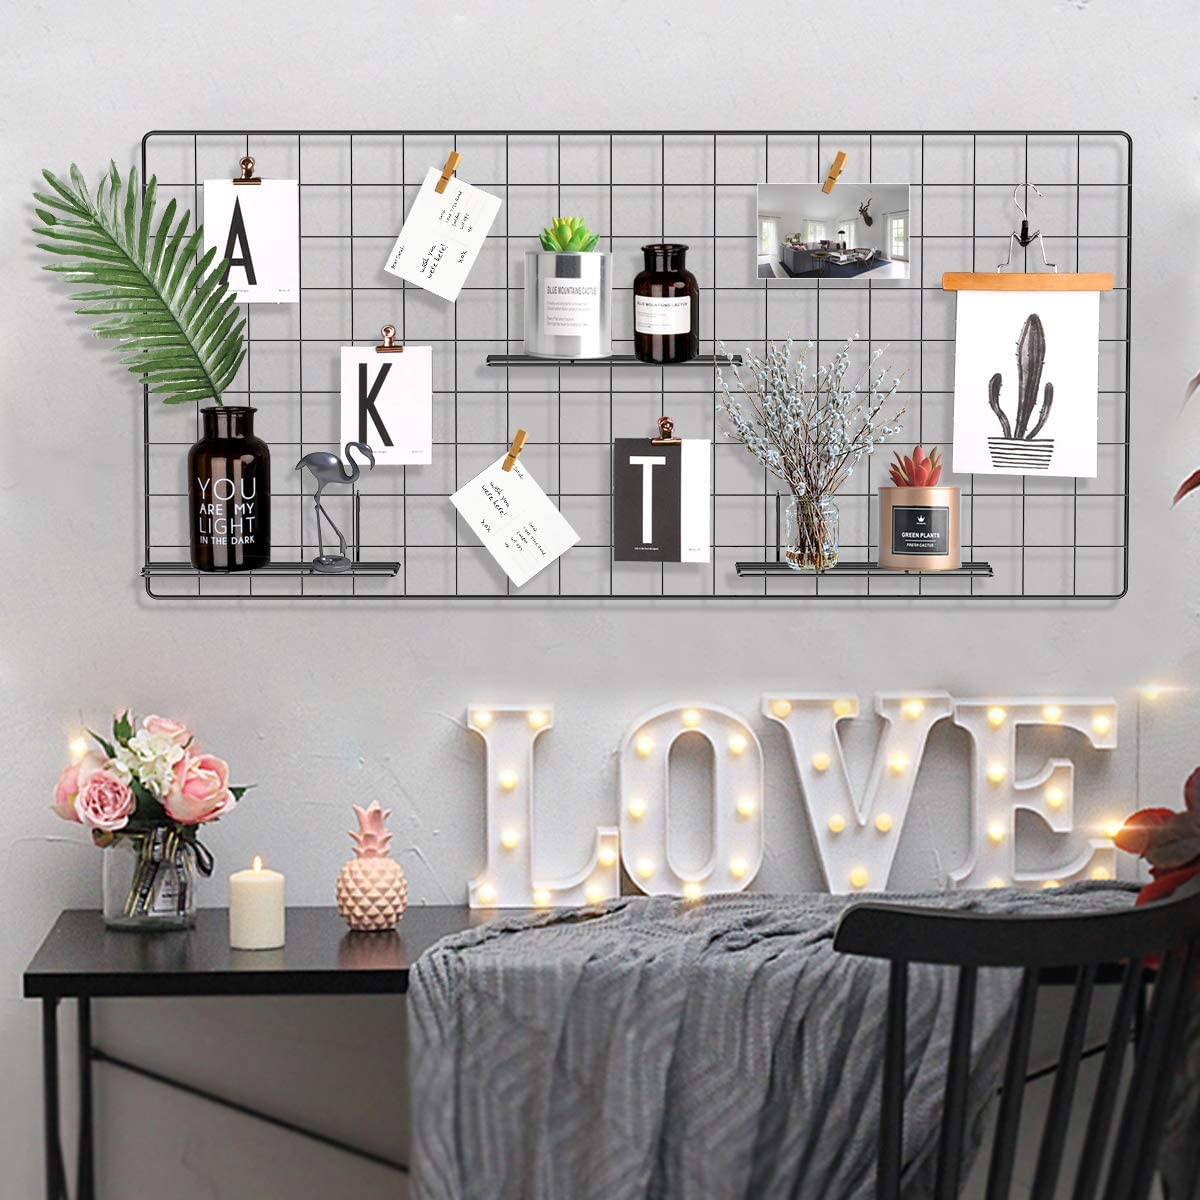 Dorm Room Ideas to decorate with plants and accessories virtual e-design services